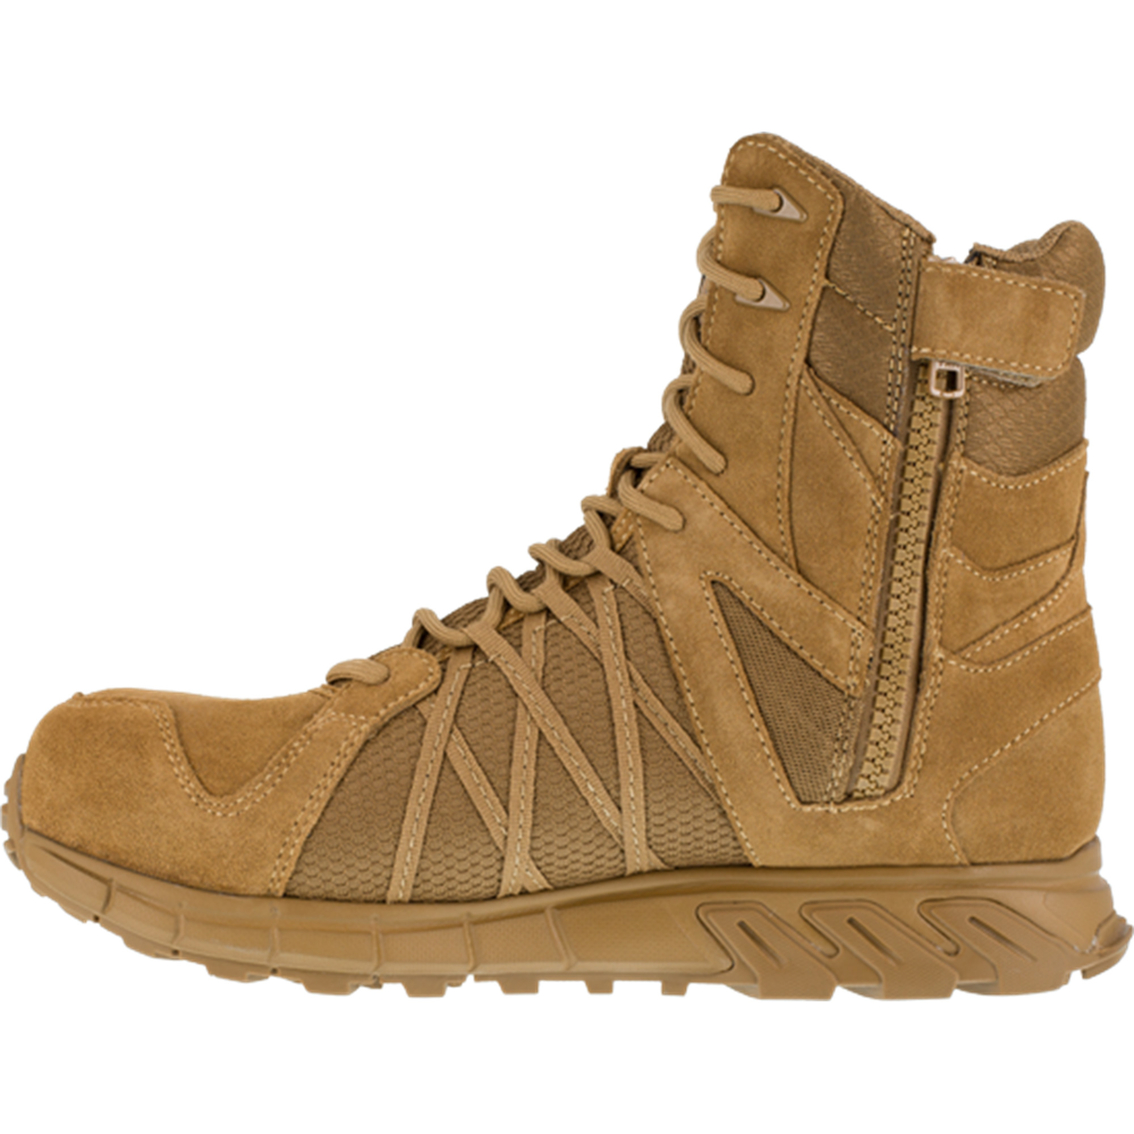 Reebok Trailgrip Tactical Boot - Image 3 of 4